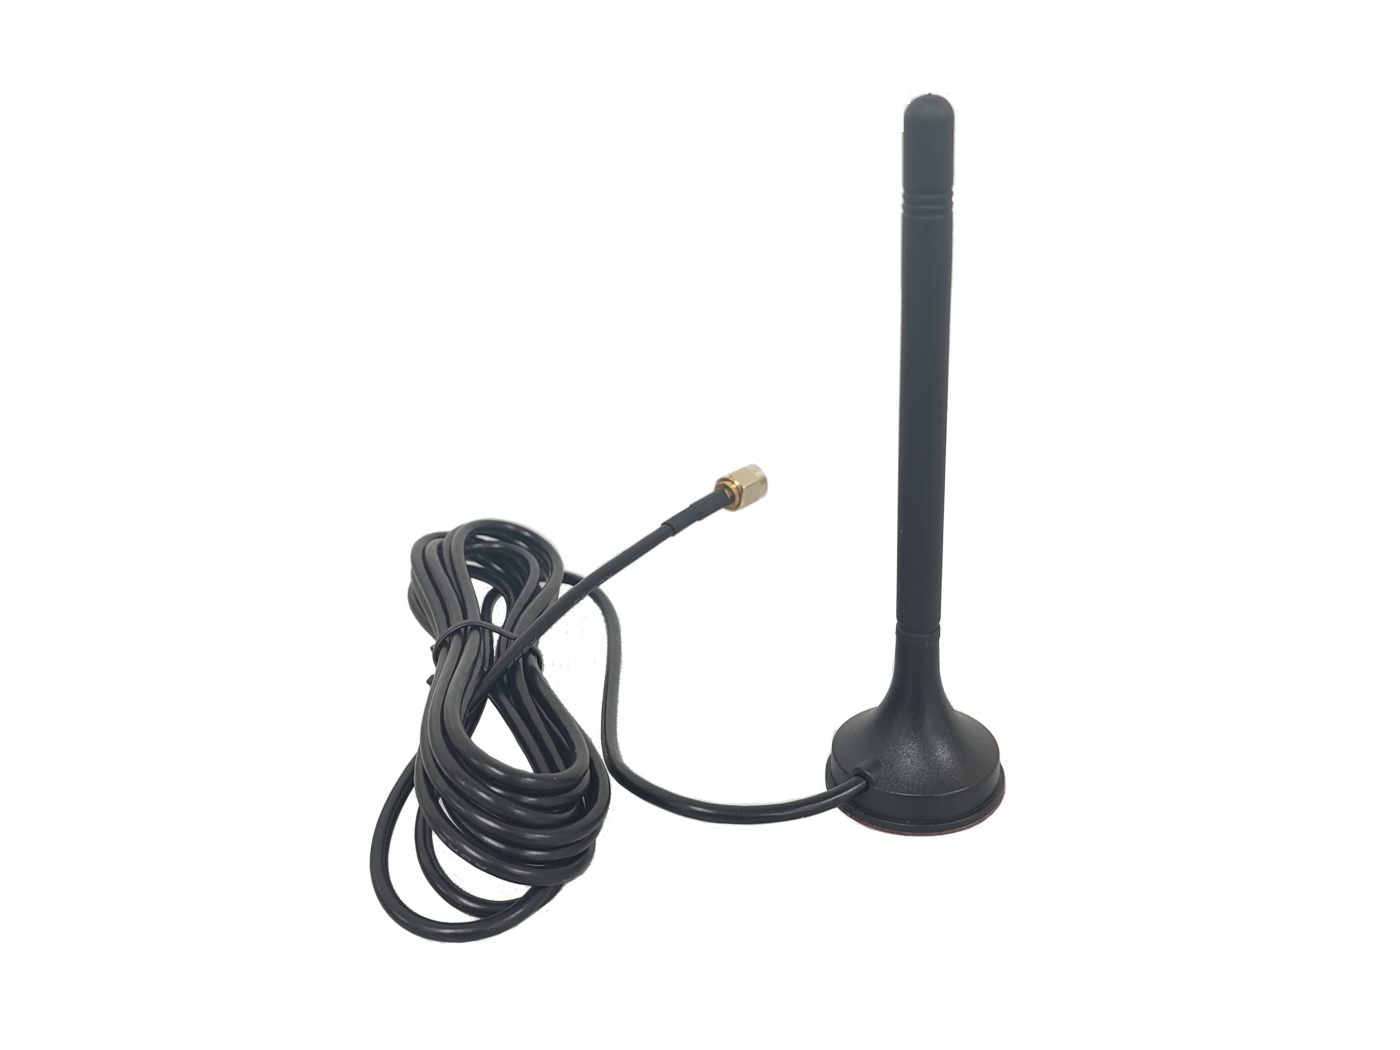 global suction MLPE | cap Antenna multi-platform with - The APsystems in USA (SUPPLY) leader technology